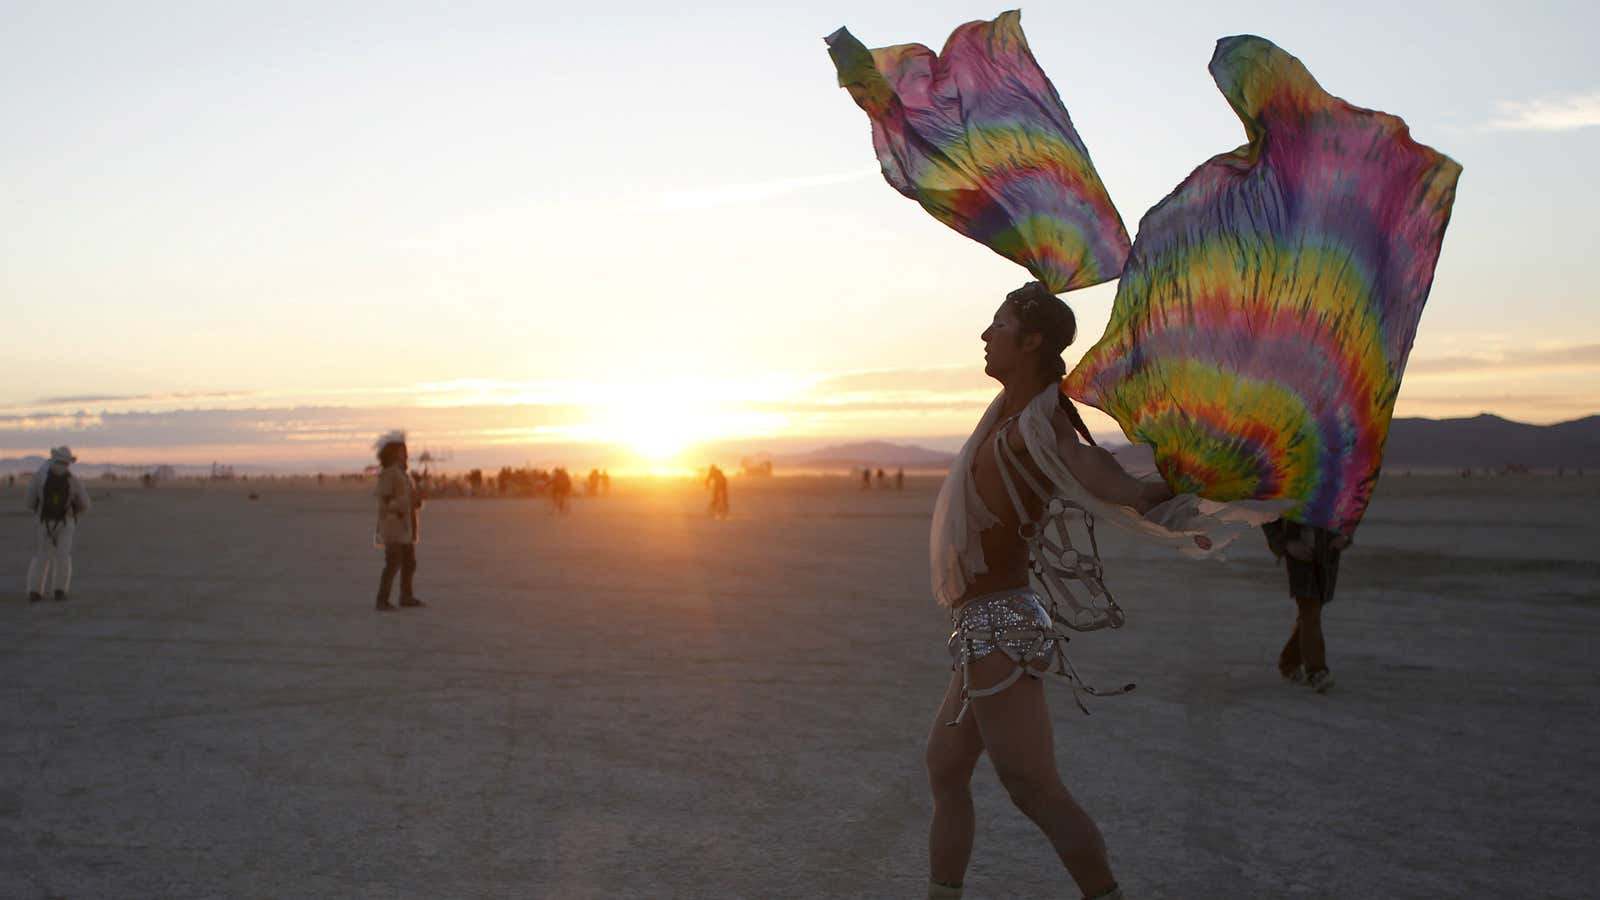 Perhaps daily life should be a bit more like Burning Man?